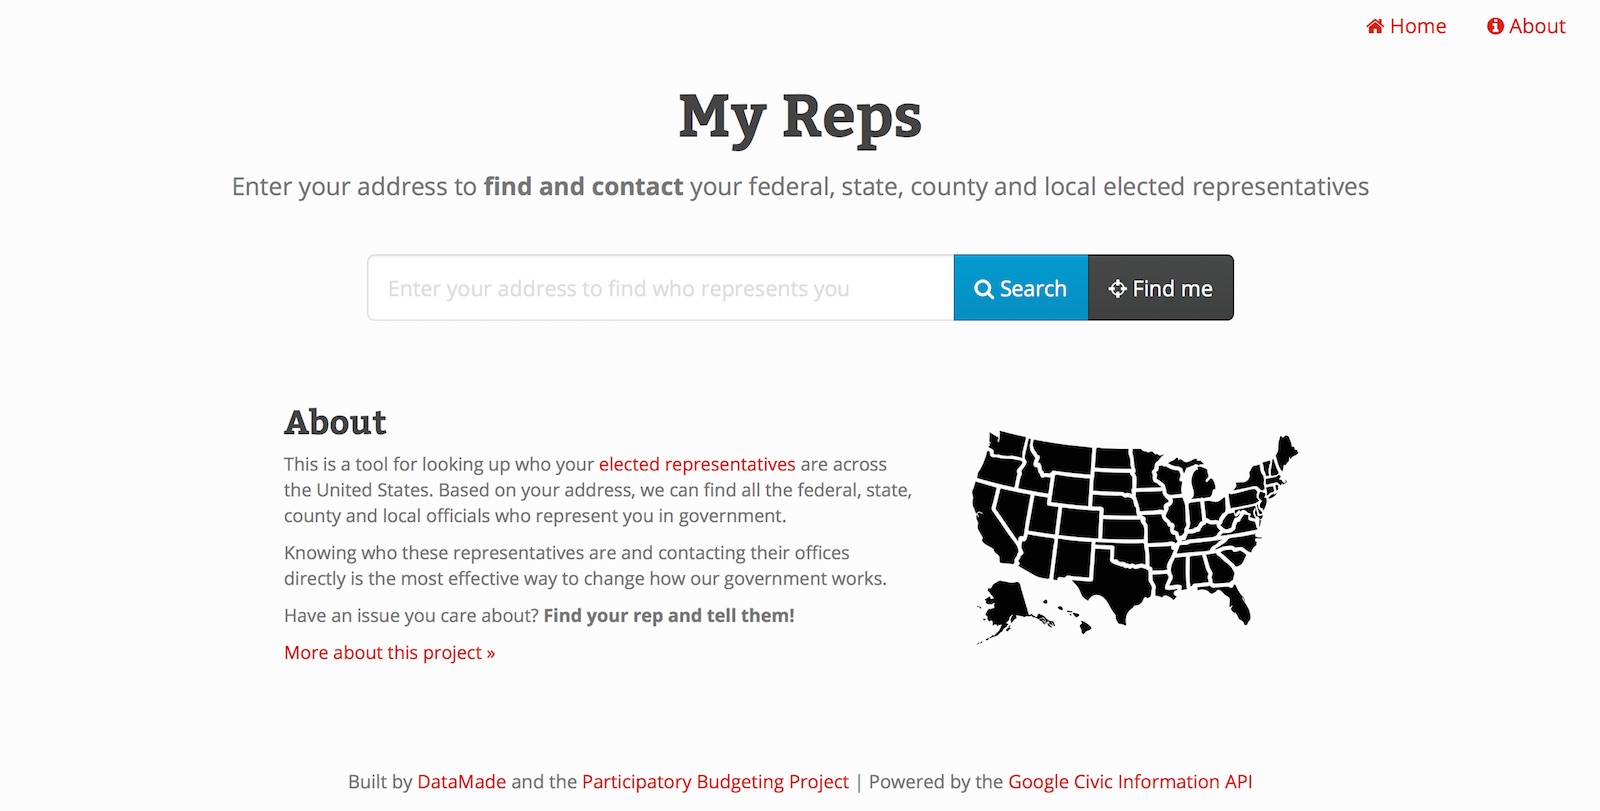 My Reps - Find and contact your federal, state, county and local elected representatives